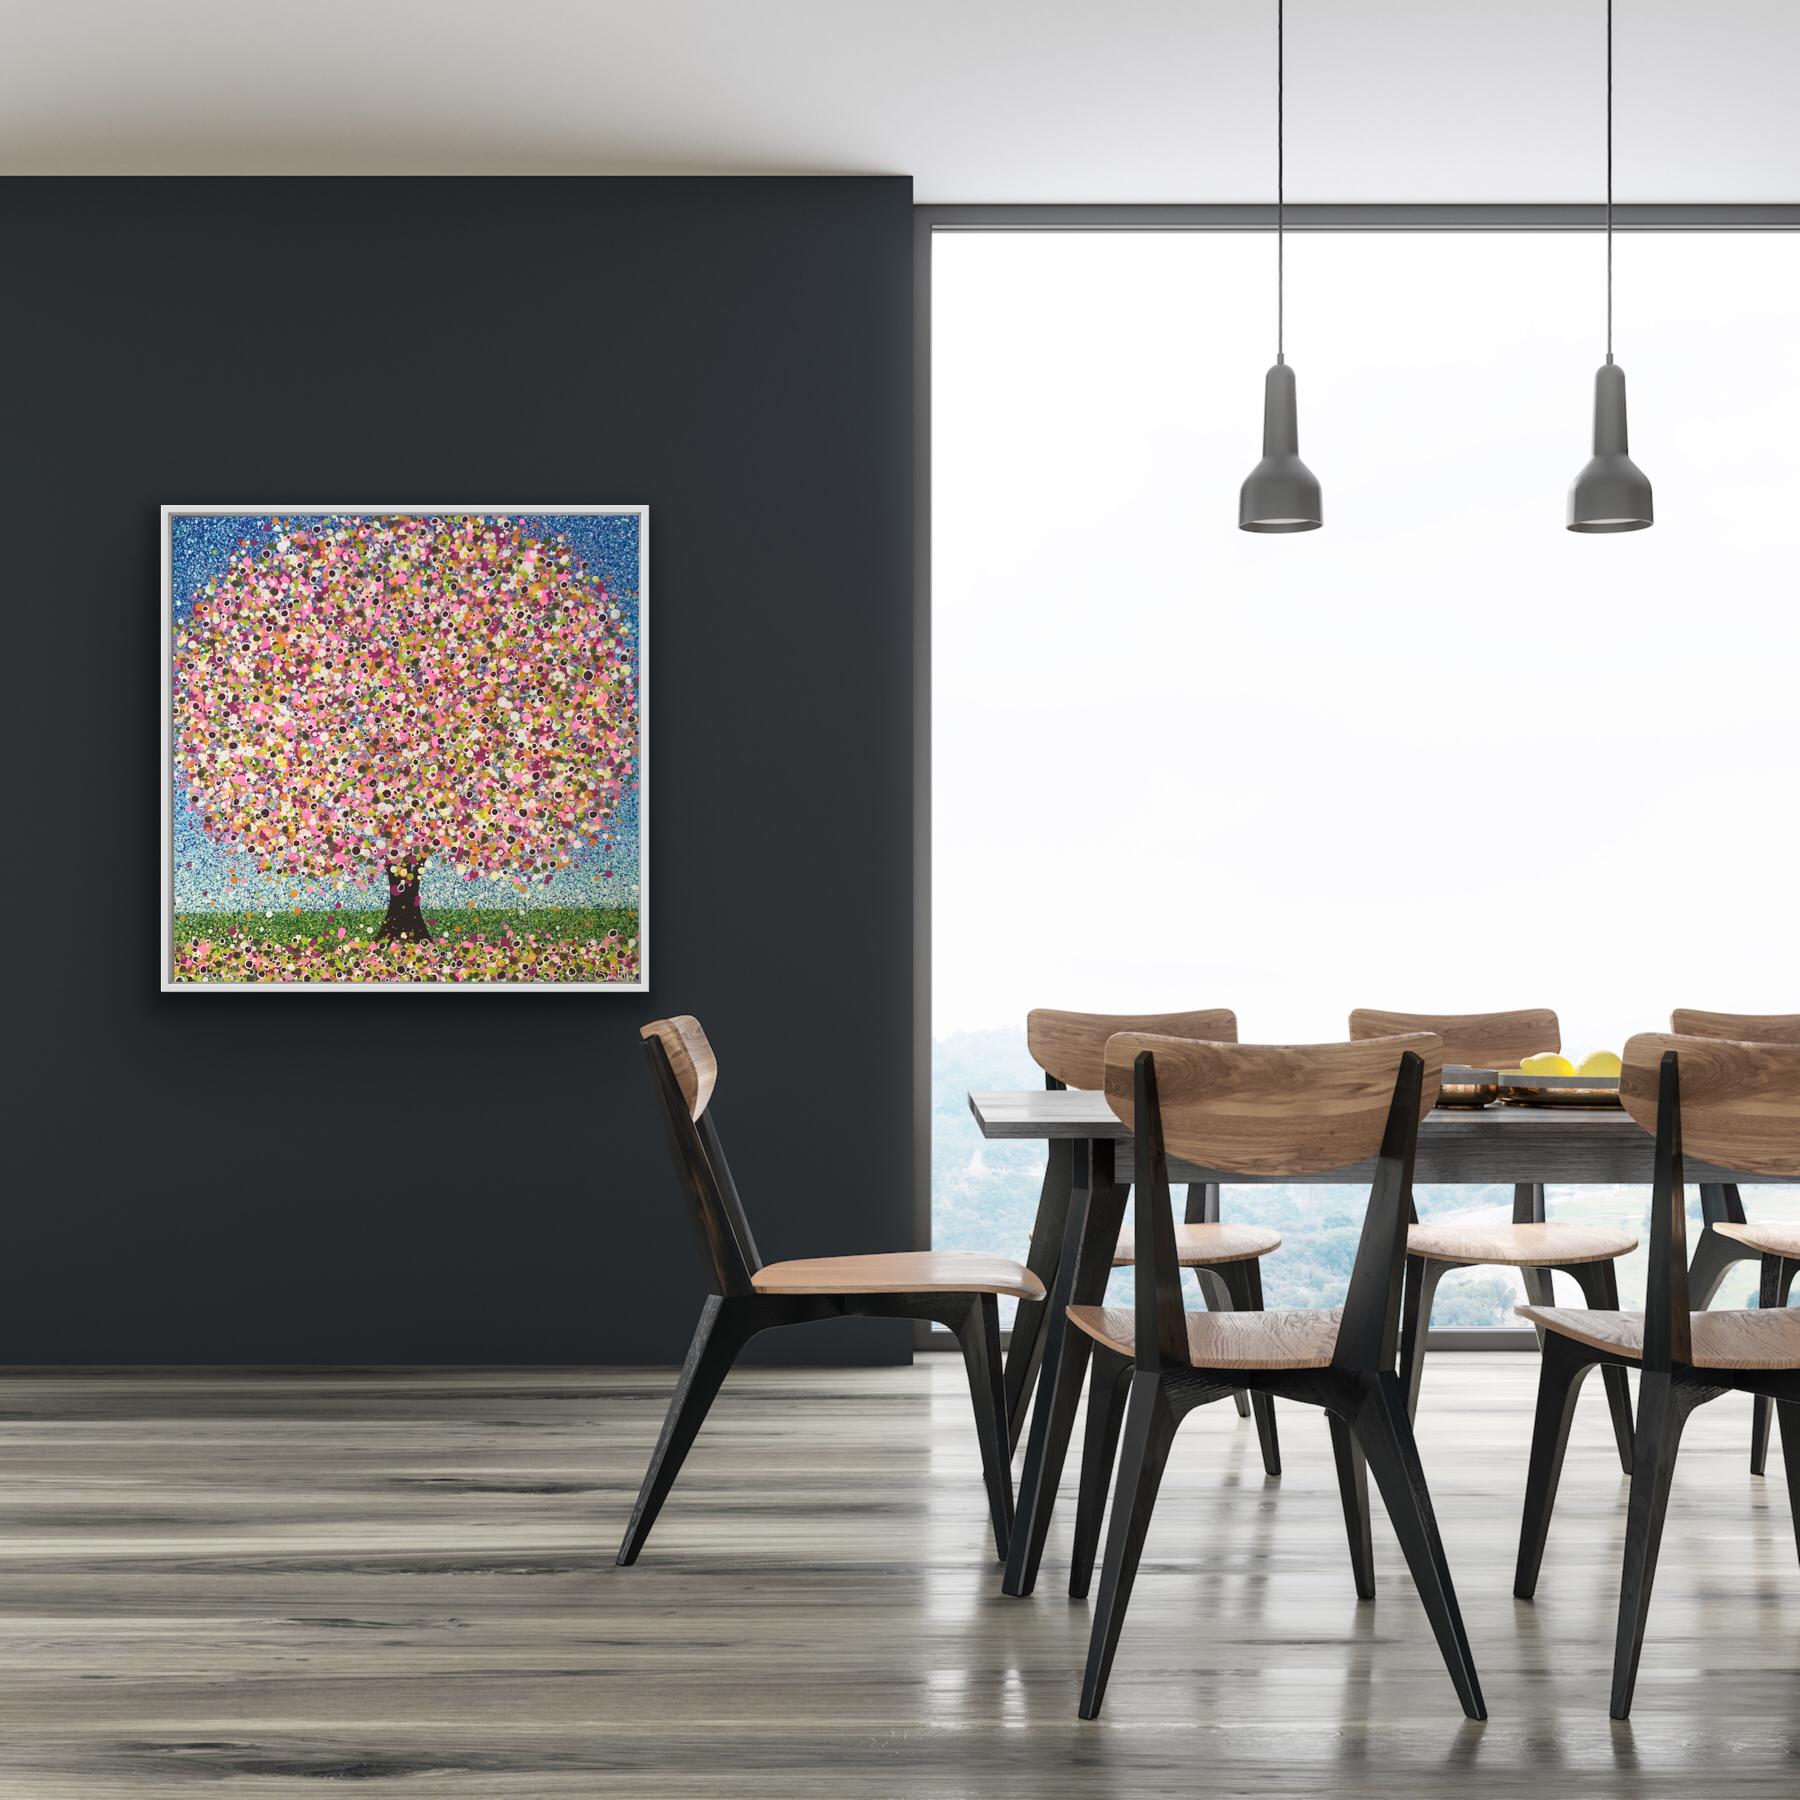 Original Acrylic Painting by Sarah Pye

A beautiful tree full of colourful buds of pinks, greens, browns and white. The tree is carpeted with more colourful buds on a green ground. The tree stands alone against a delightful blue and white